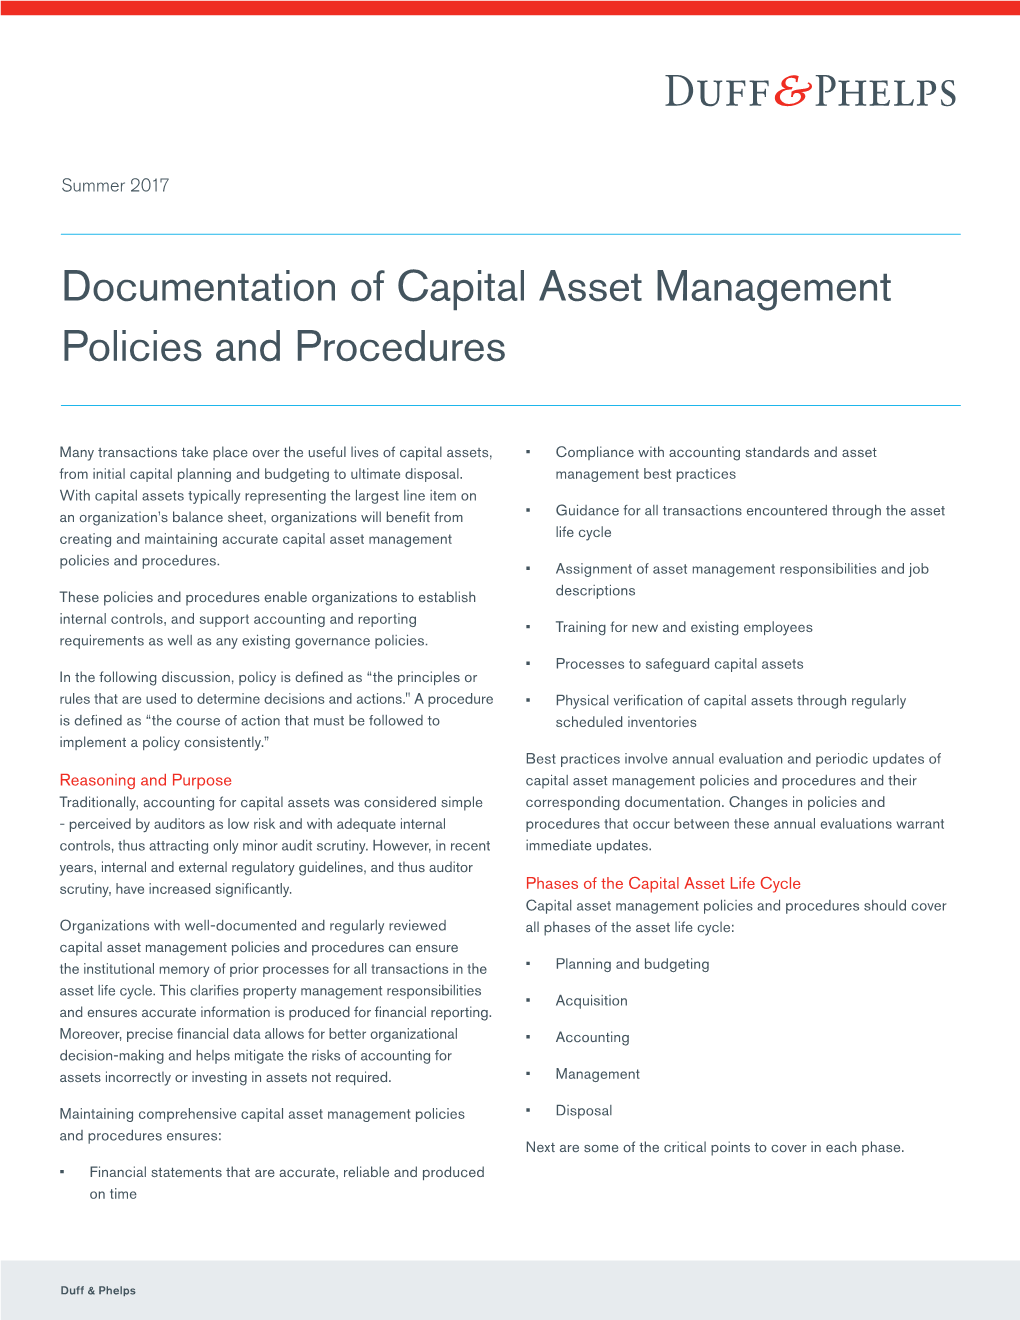 Documentation of Capital Asset Management Policies and Procedures